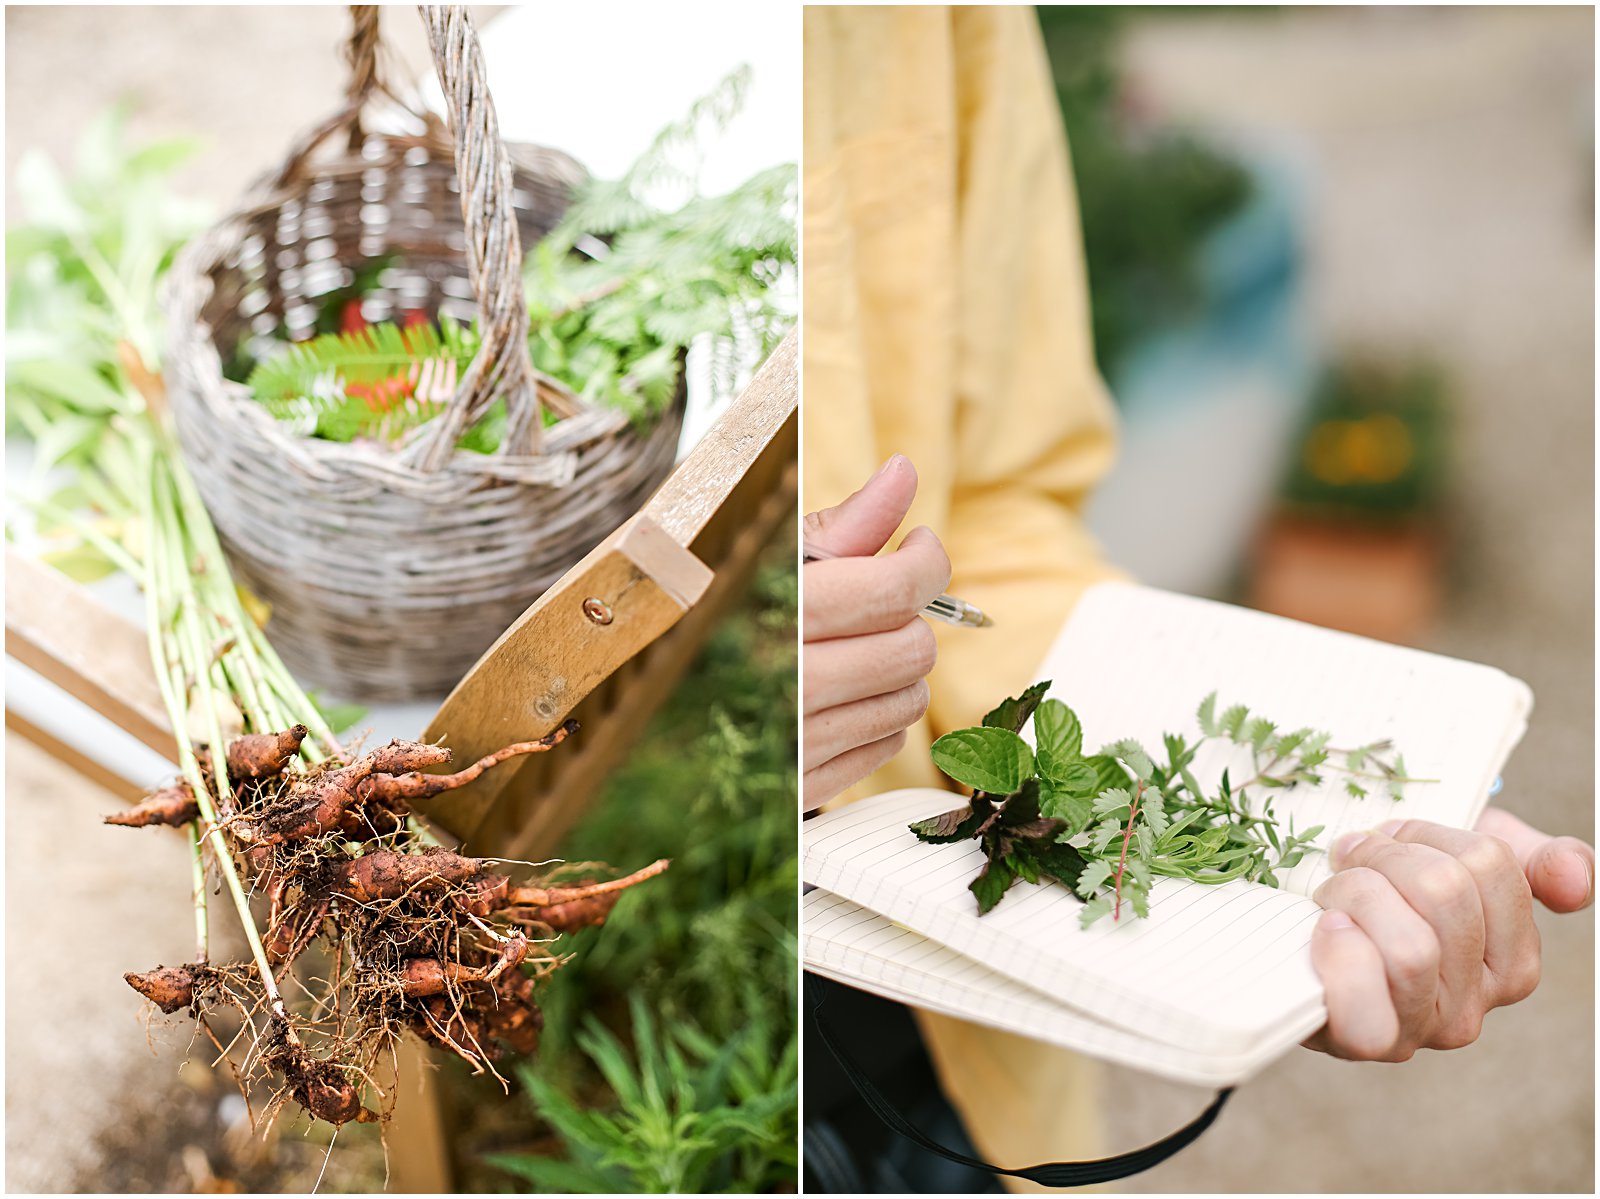 Local herbs and plants at a vegetarian cooking class in Rome